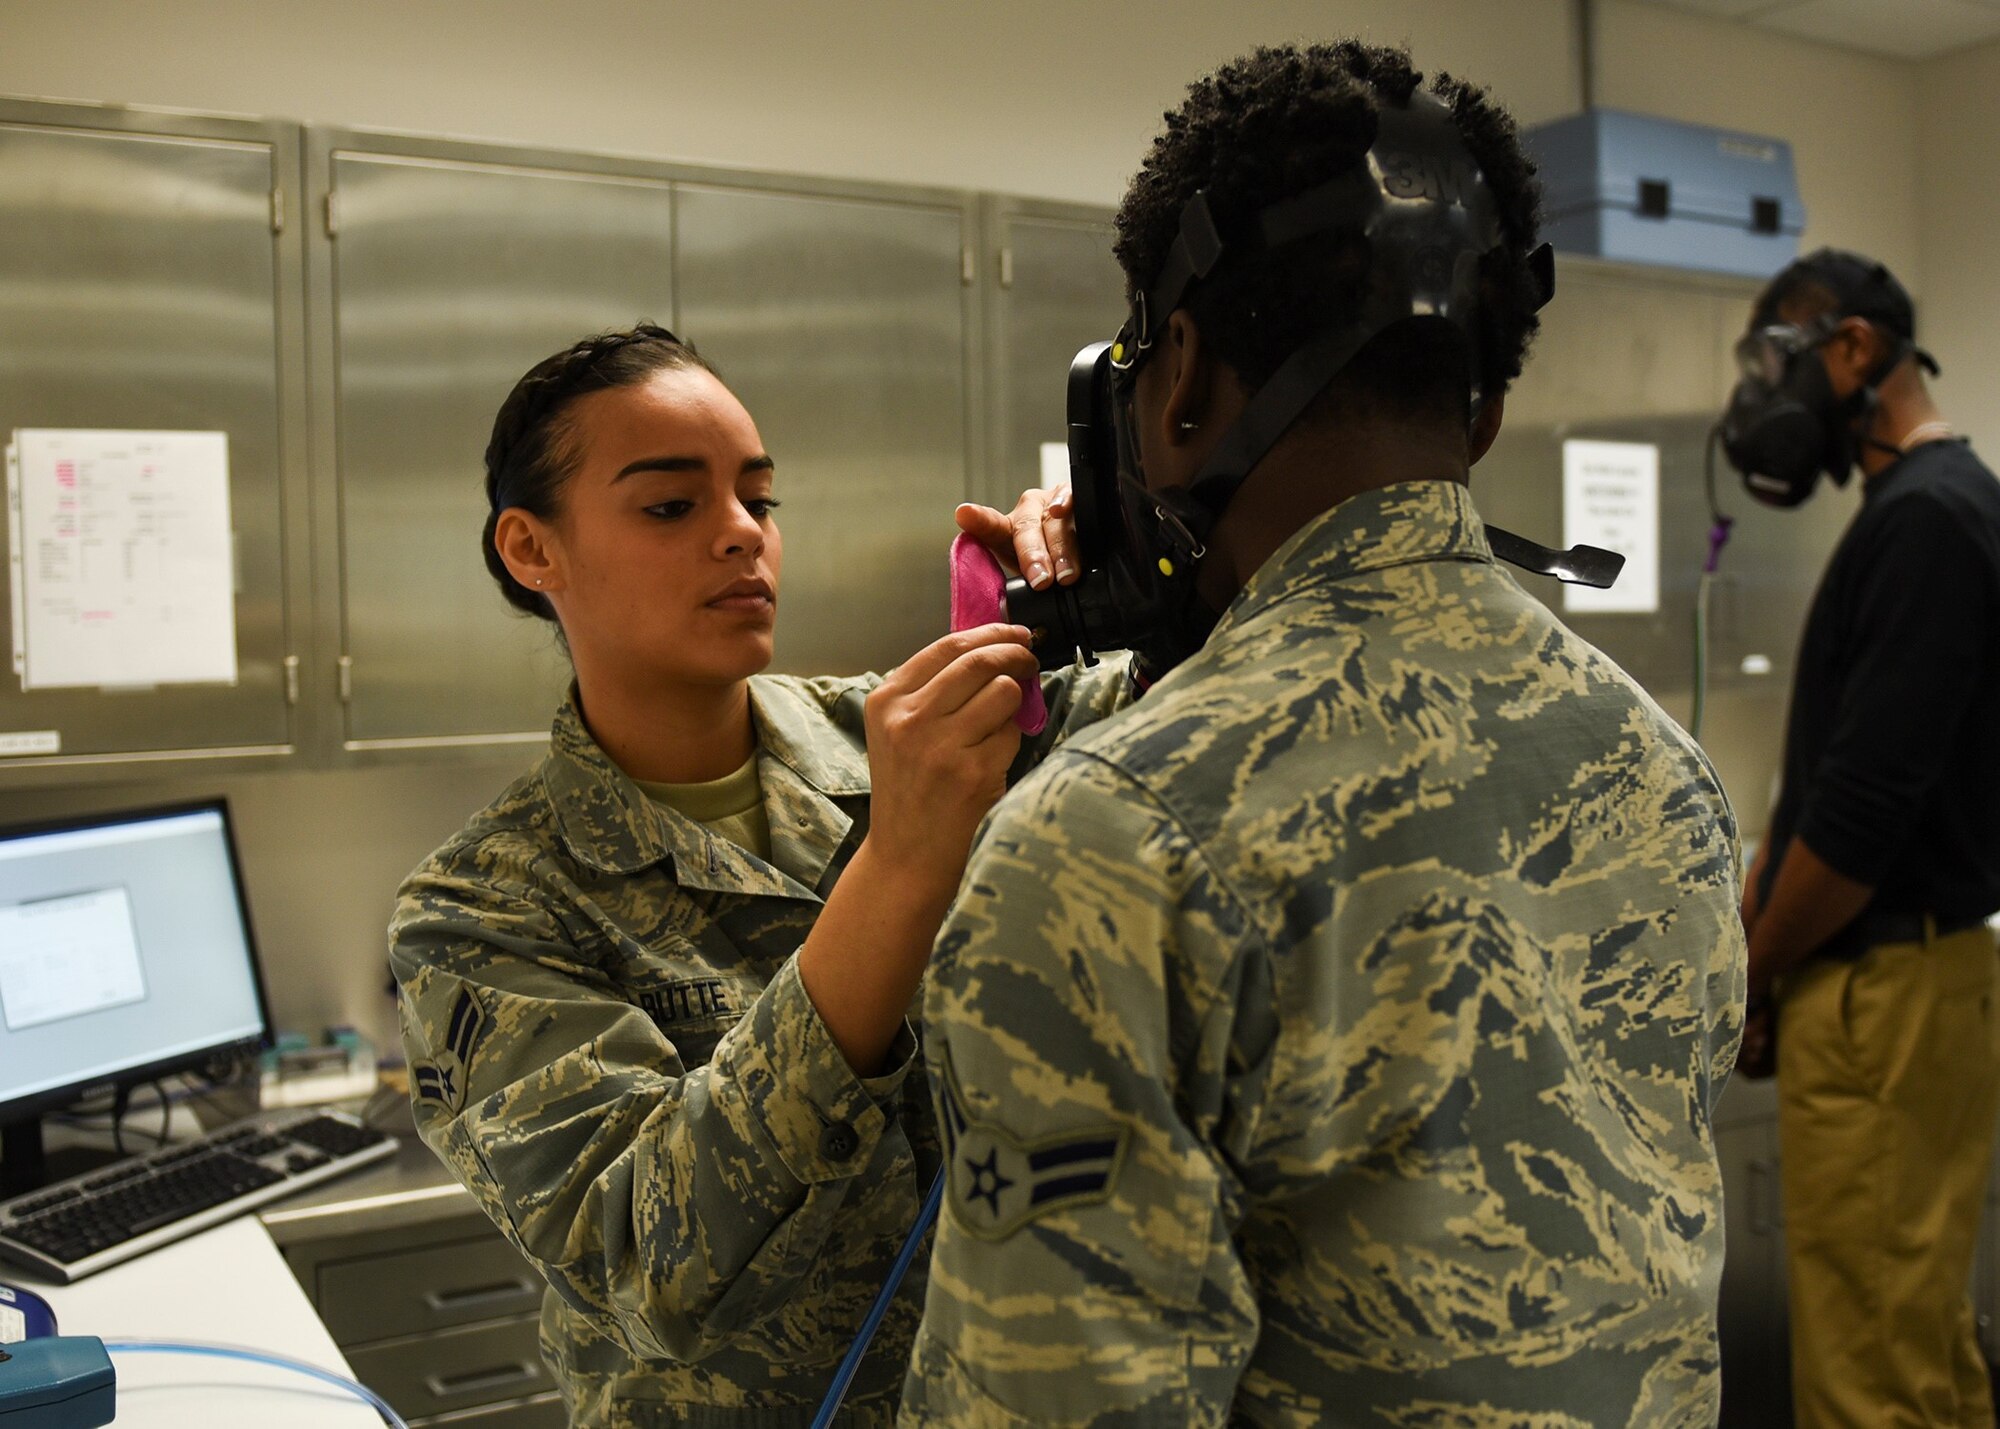 U.S Air Force Airman 1st Class Dannyel Butte, 325th Aerospace Medicine Squadron bioenvironmental engineer apprentice, assists Airman 1st Class Dorothy Russell, 325th Aerospace Medicine Squadron bioenvironmental engineer apprentice, with her gas mask fit test at the 325th Medical Group Clinic on Tyndall Air Force Base, Fla., Jan. 25, 2017. Bioenvironmental engineers help protect Airmen and their families from environmental and occupation hazards, preventing and controlling the spread of disease, and safeguarding the physical and mental wellbeing patients. (U.S. Air Force photo by Senior Airman Dustin Mullen/Released)